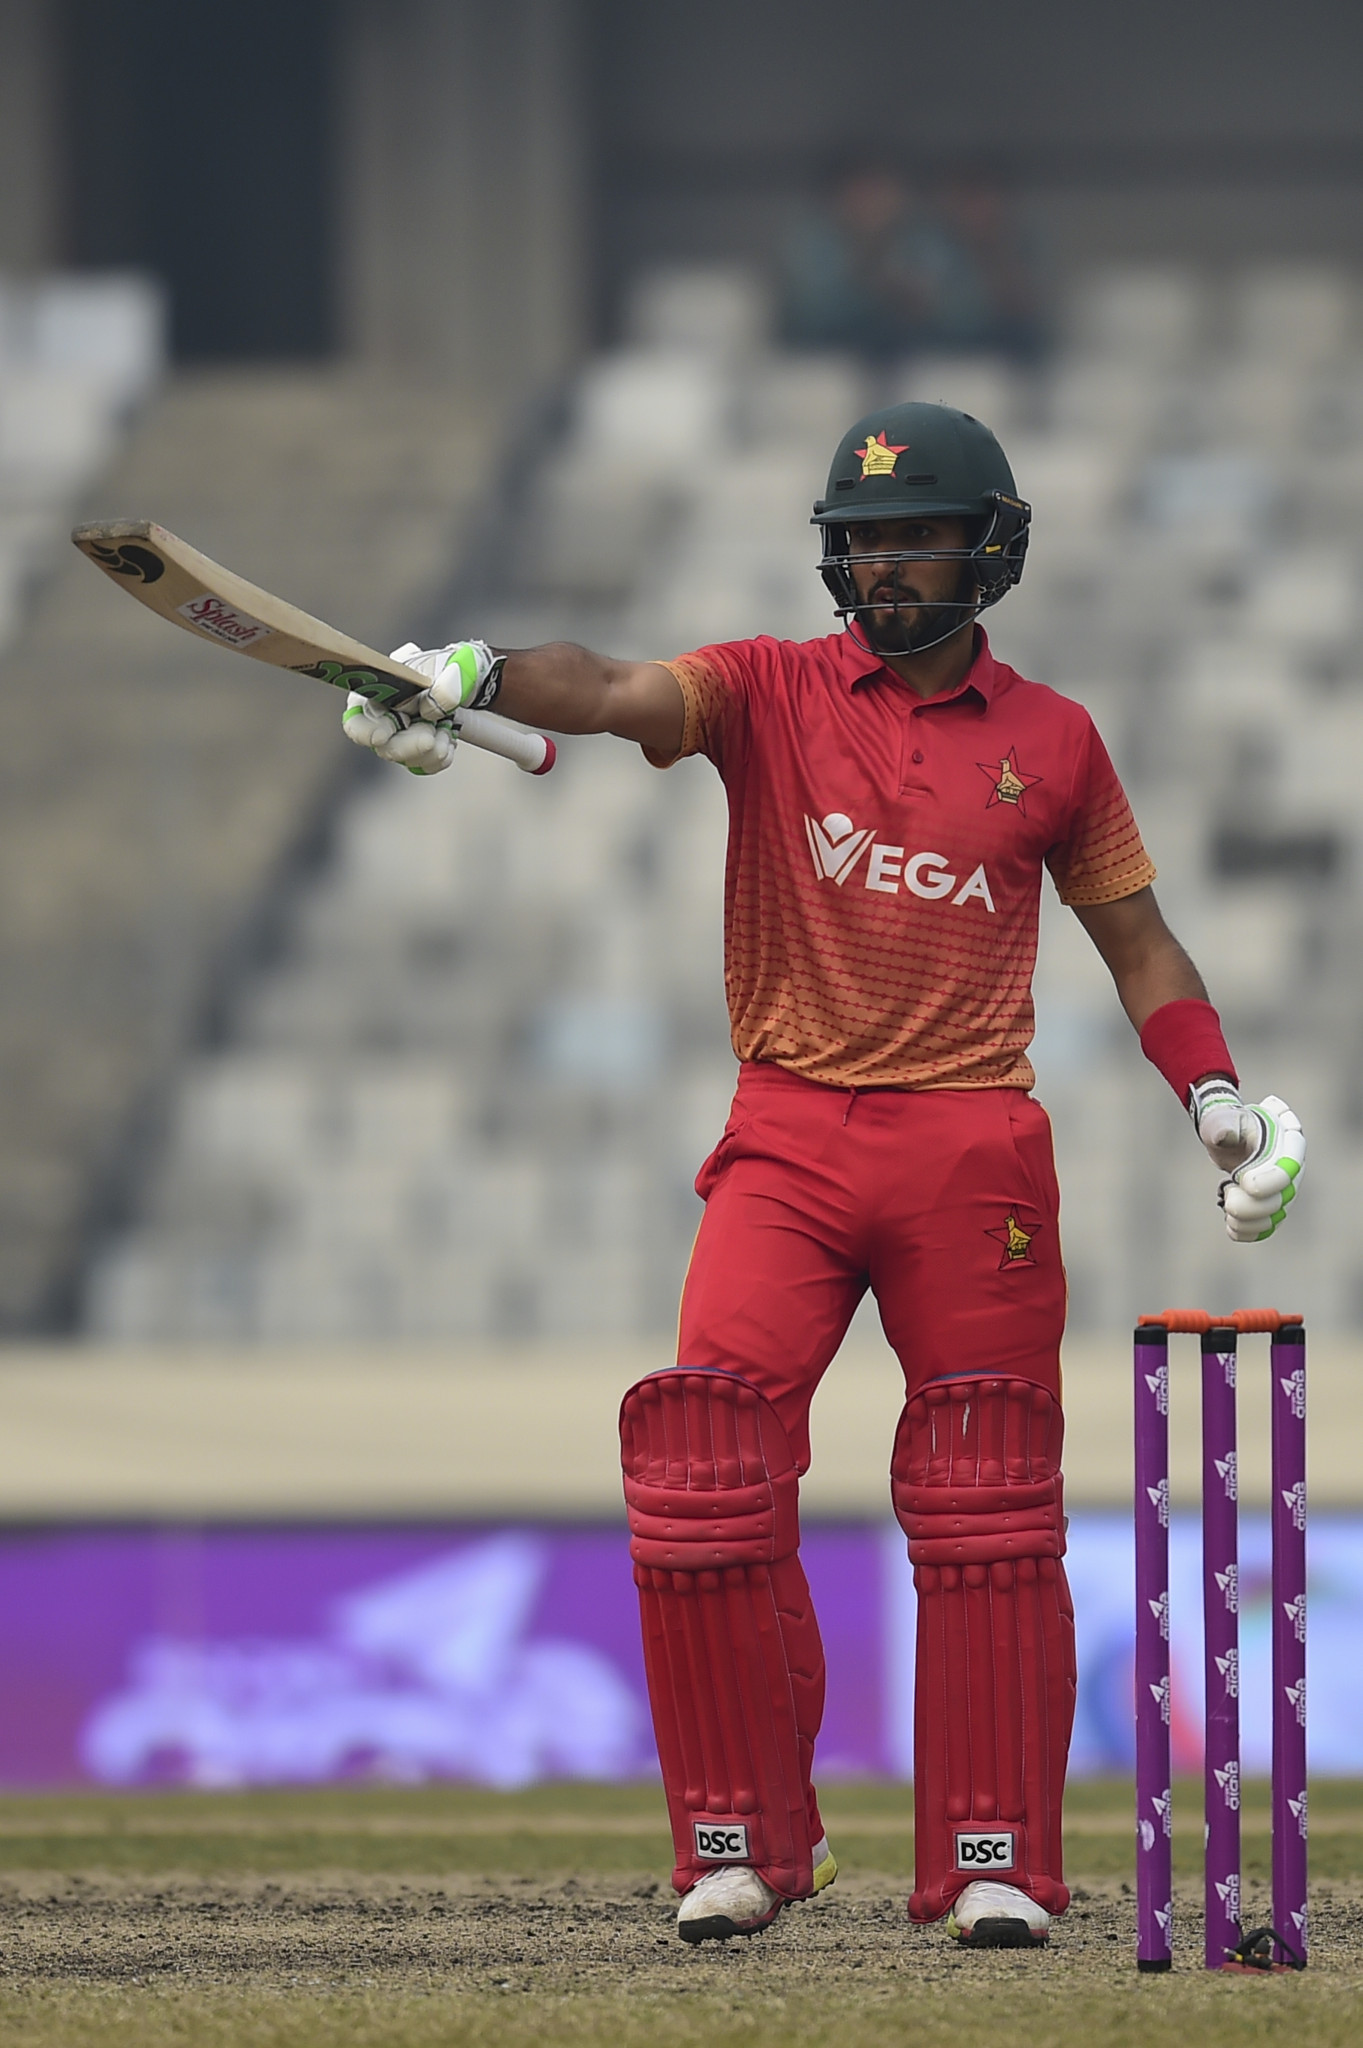 Ireland's Cricket World Cup qualification hopes dip with Zimbabwe defeat